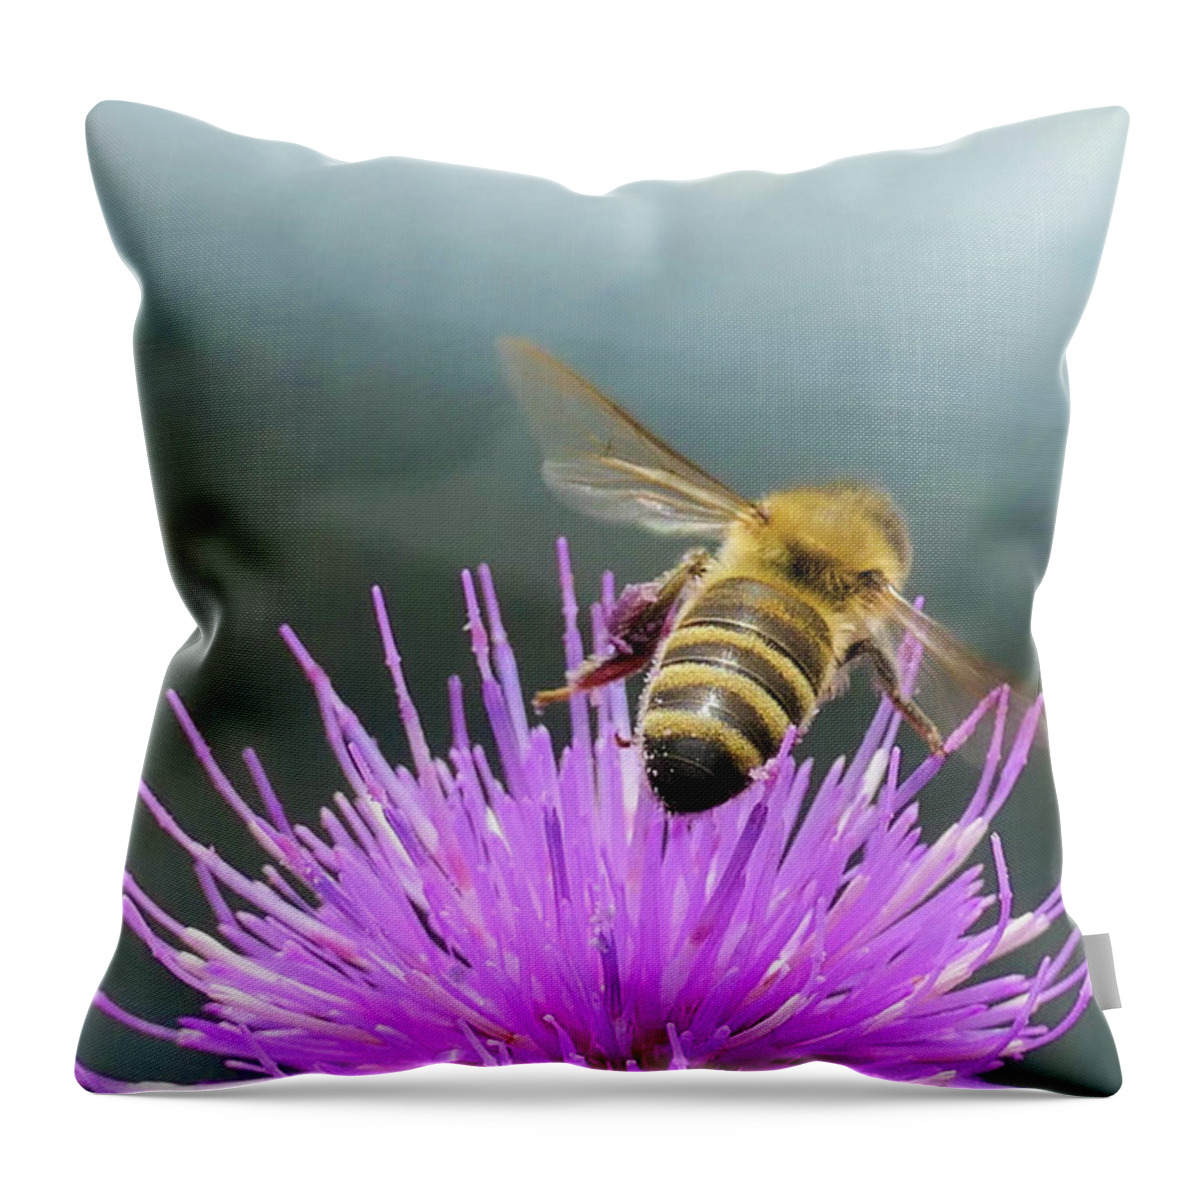 Flower Throw Pillow featuring the digital art Bee by Pal Szeplaky